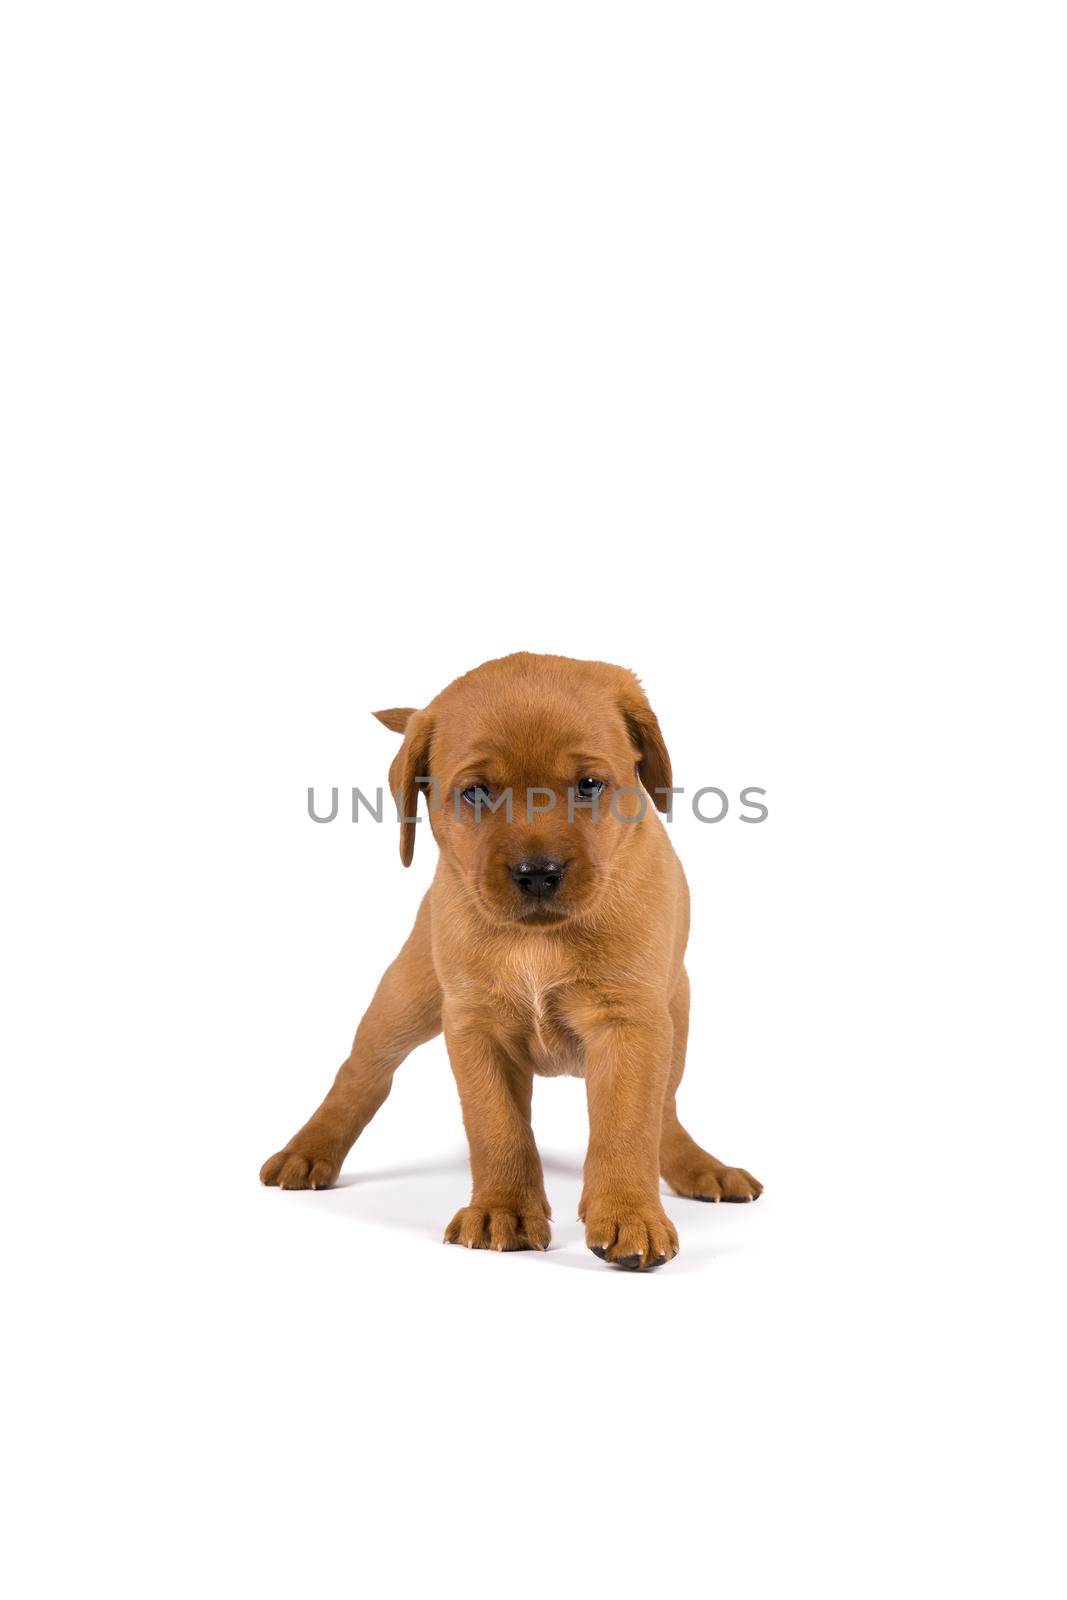 5 week old labrador puppy isolated on a white background standing by LeoniekvanderVliet